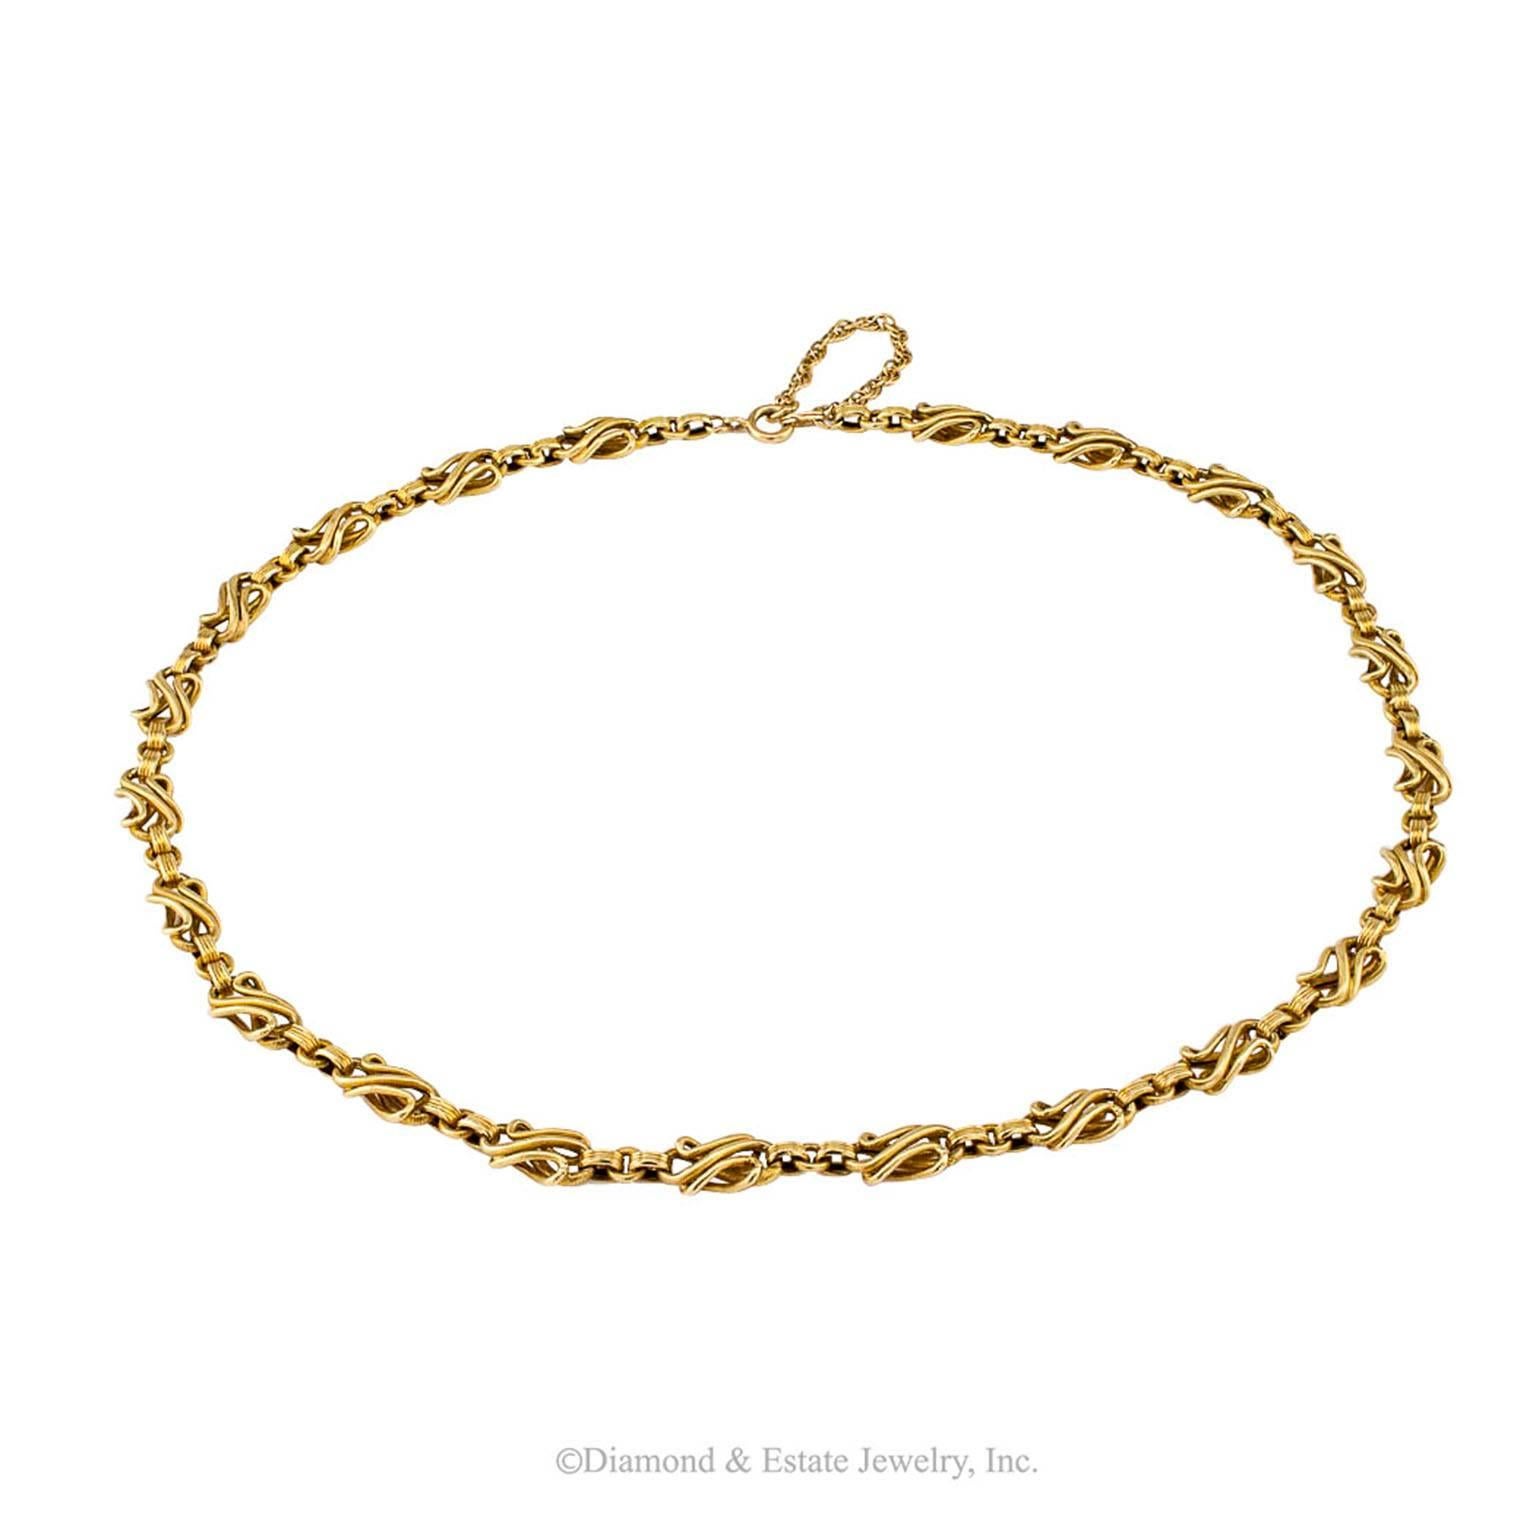 1900s Handmade Gold Chain Necklace

1900s handmade gold chain necklace.  The 14-karat yellow gold design is based on a composition of fluid shapes and strong geometric lines continuously alternating with each other.  Ideal for wearing by itself or